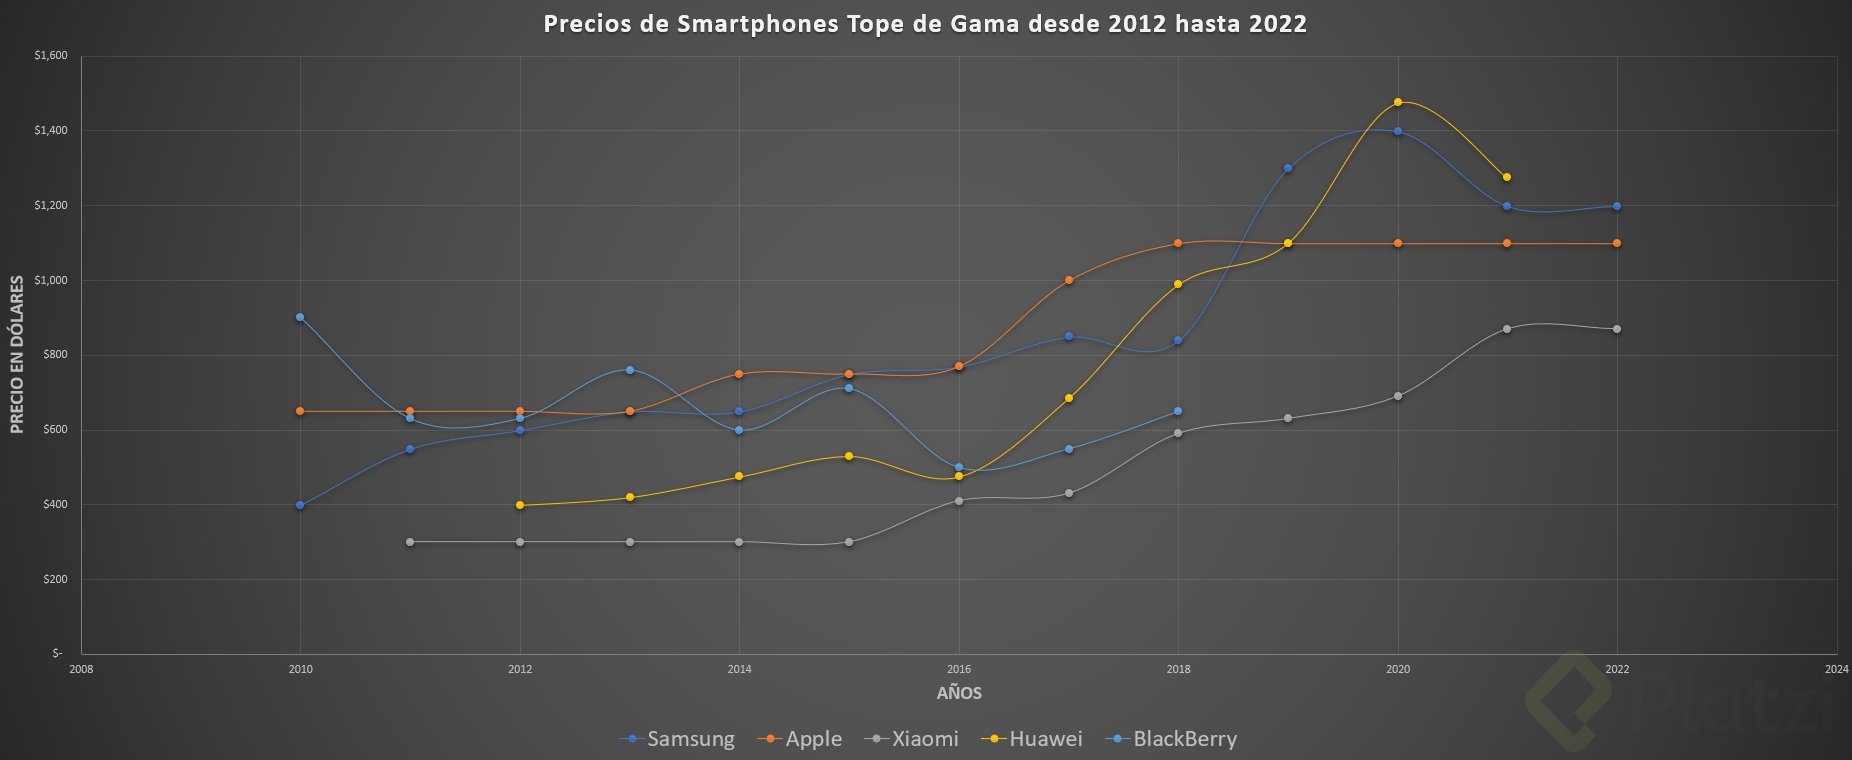 Smartphone Prices - Excel 6_25_2022 8_05_15 PM.png